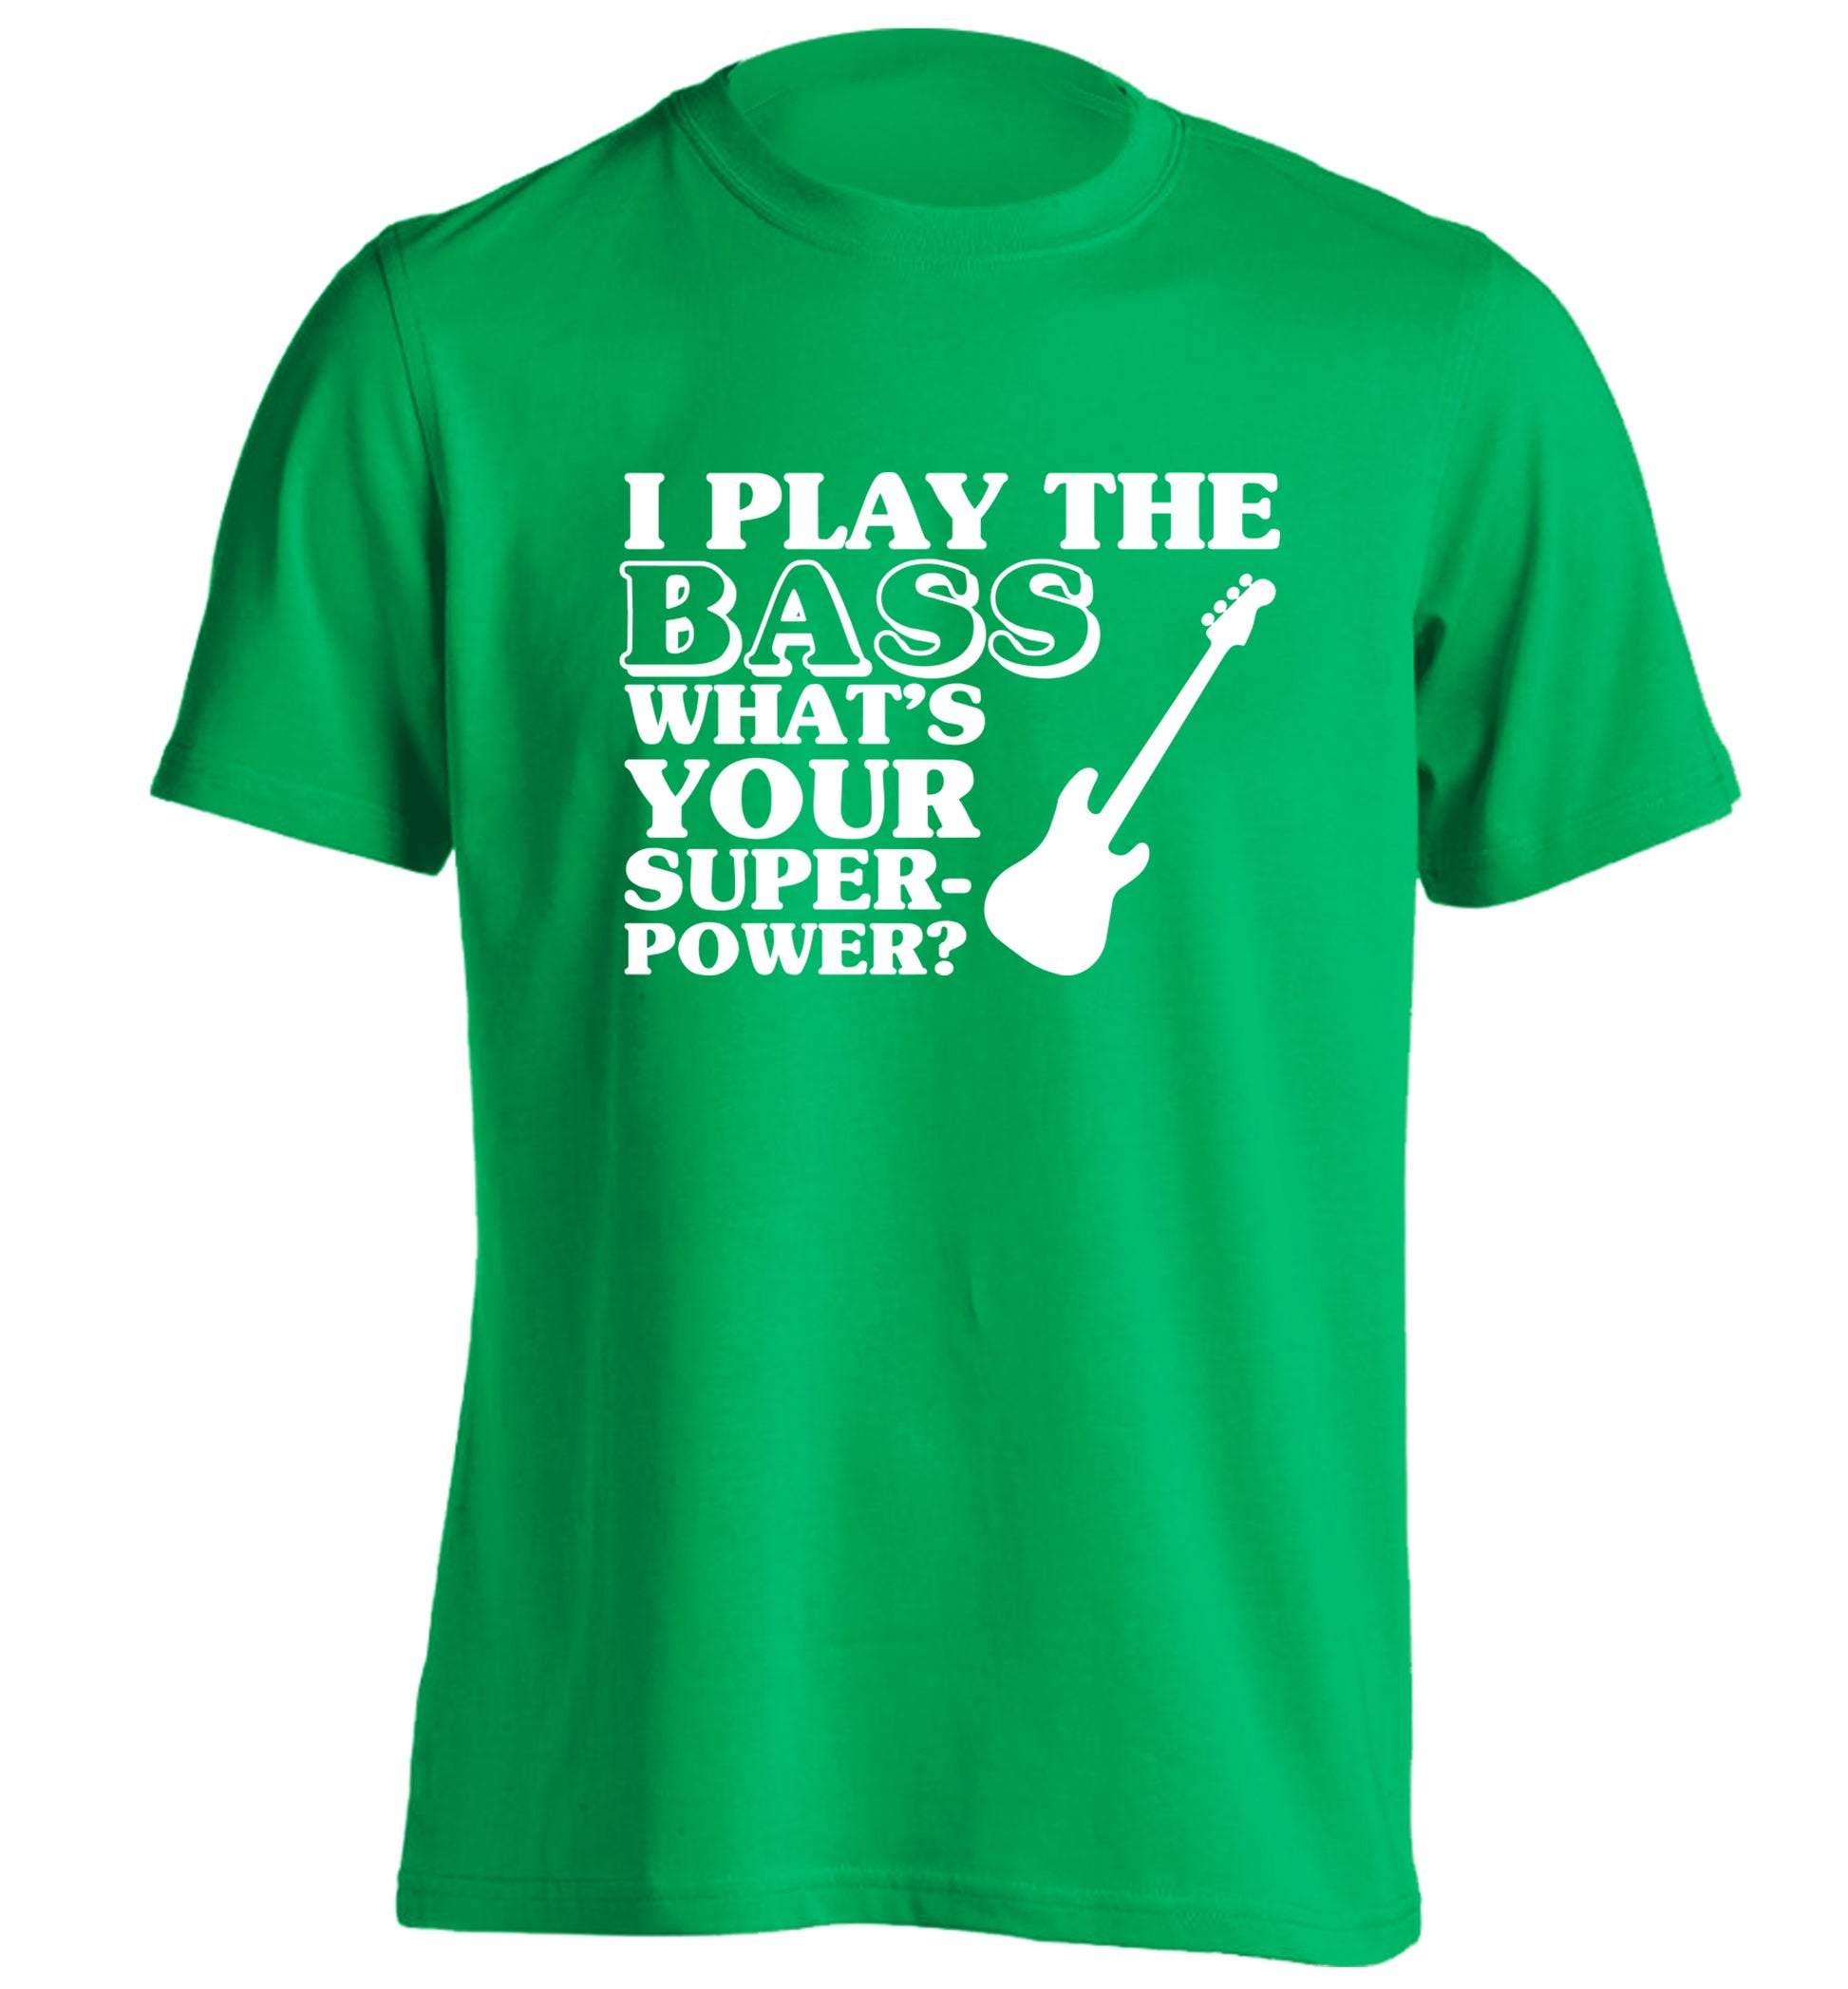 I play the bass what's your superpower? adults unisex green Tshirt 2XL